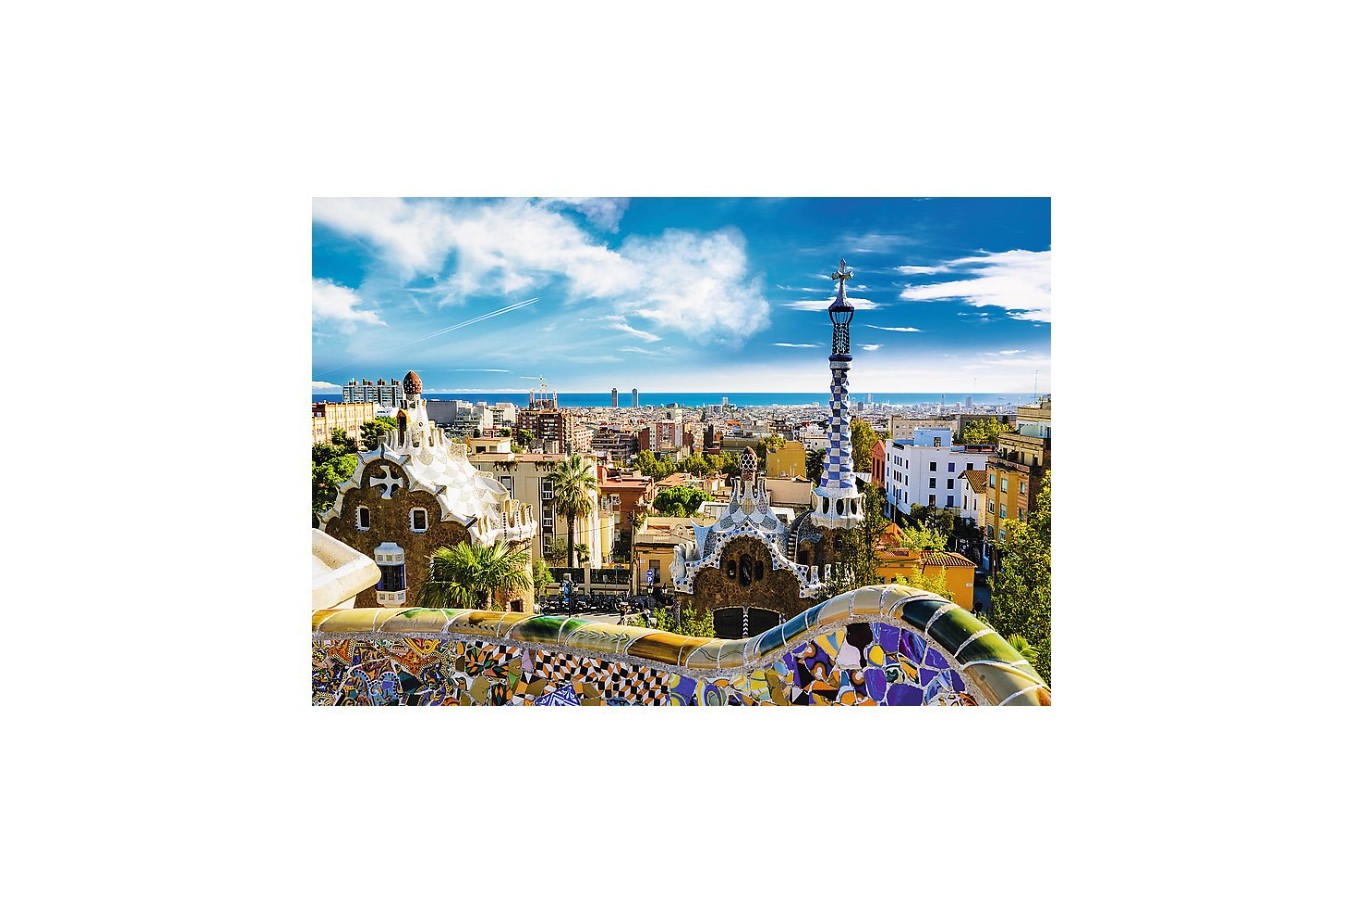 Puzzle Trefl - Park Guell, Barcelona, 1500 piese (64865)